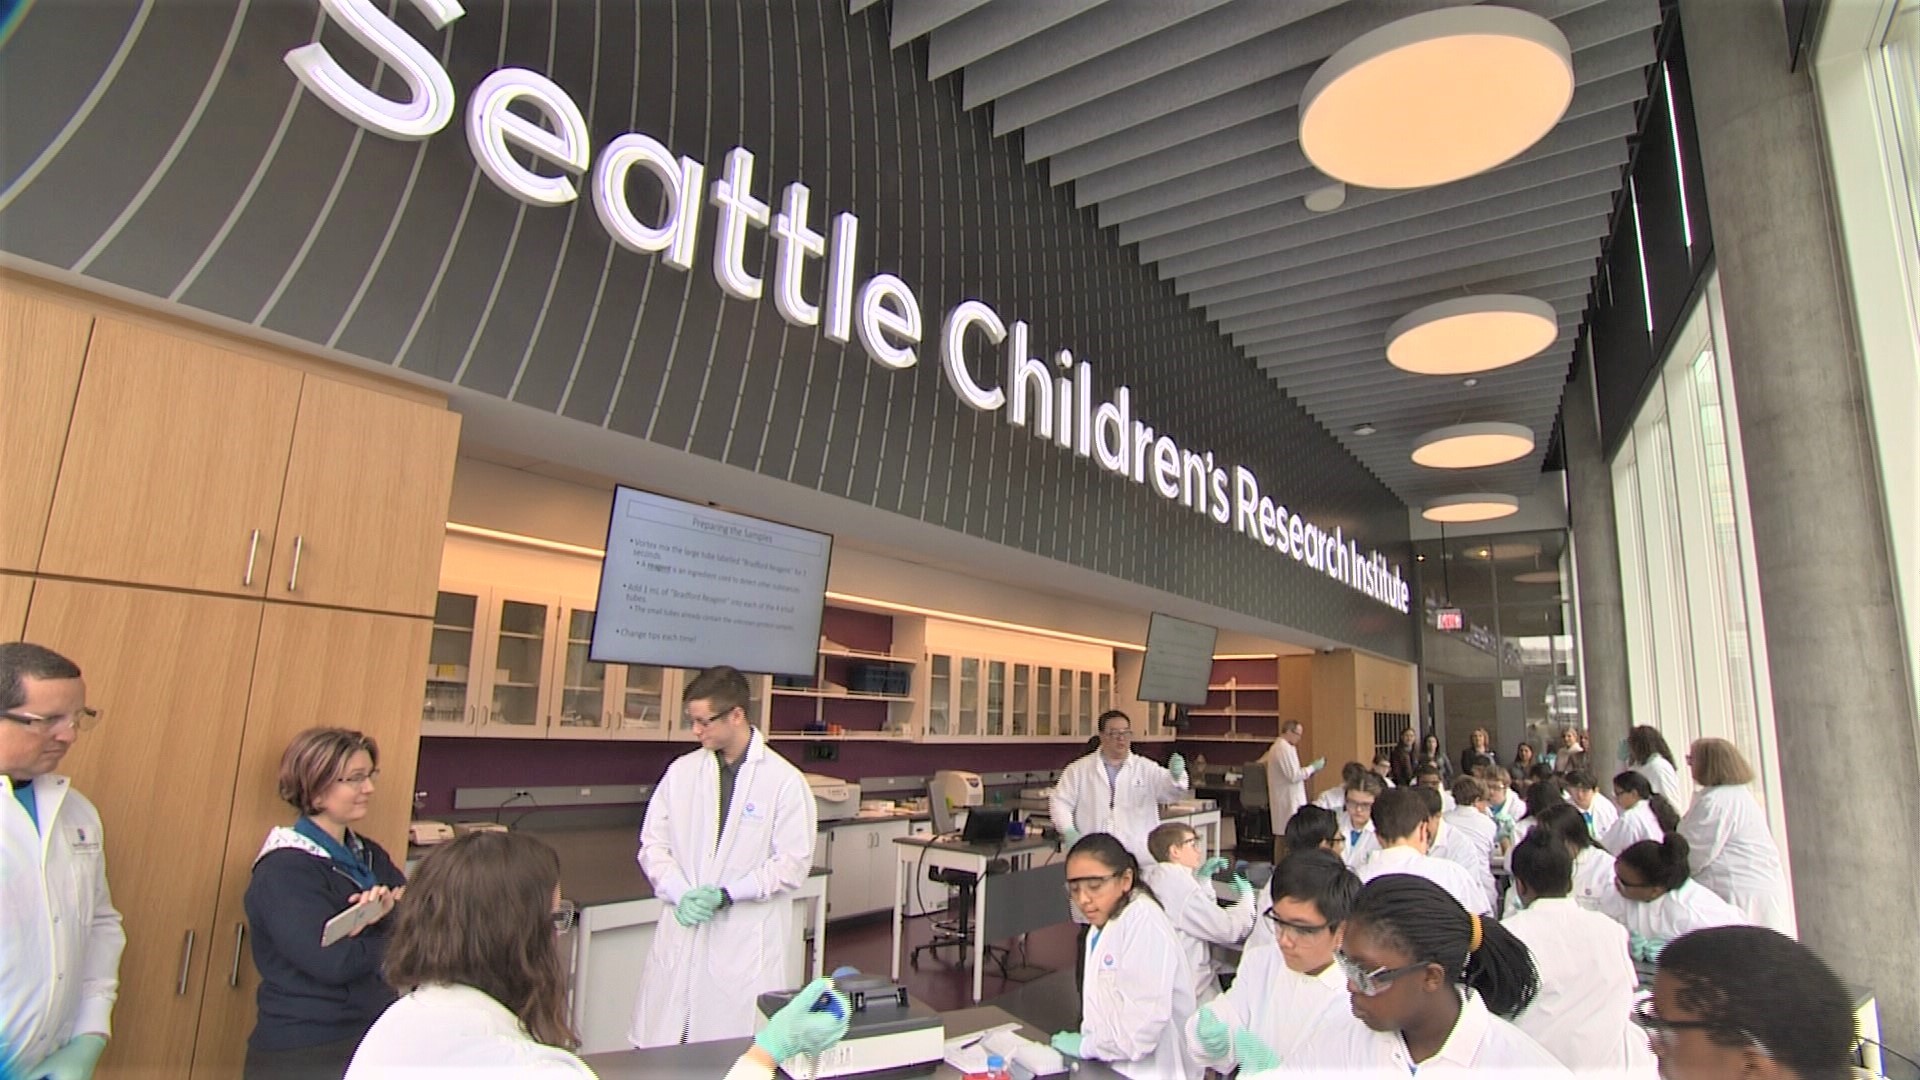 The Science Discovery Lab opened today inside Building Cure in South Lake Union. Sponsored by Seattle Children's.